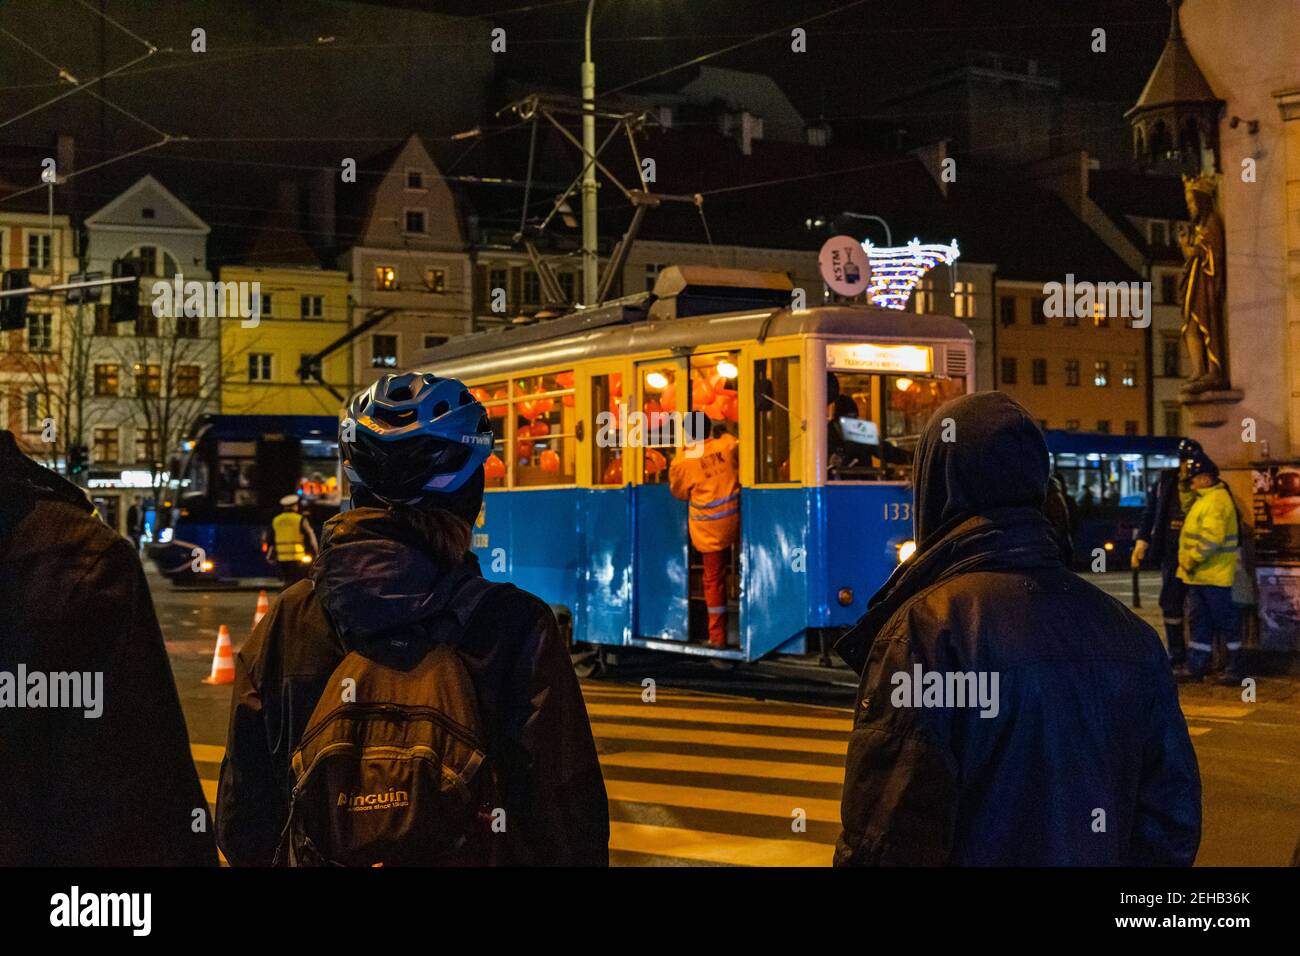 Wroclaw January 17 2020 People looking to Old Derailed tram on street at night Stock Photo